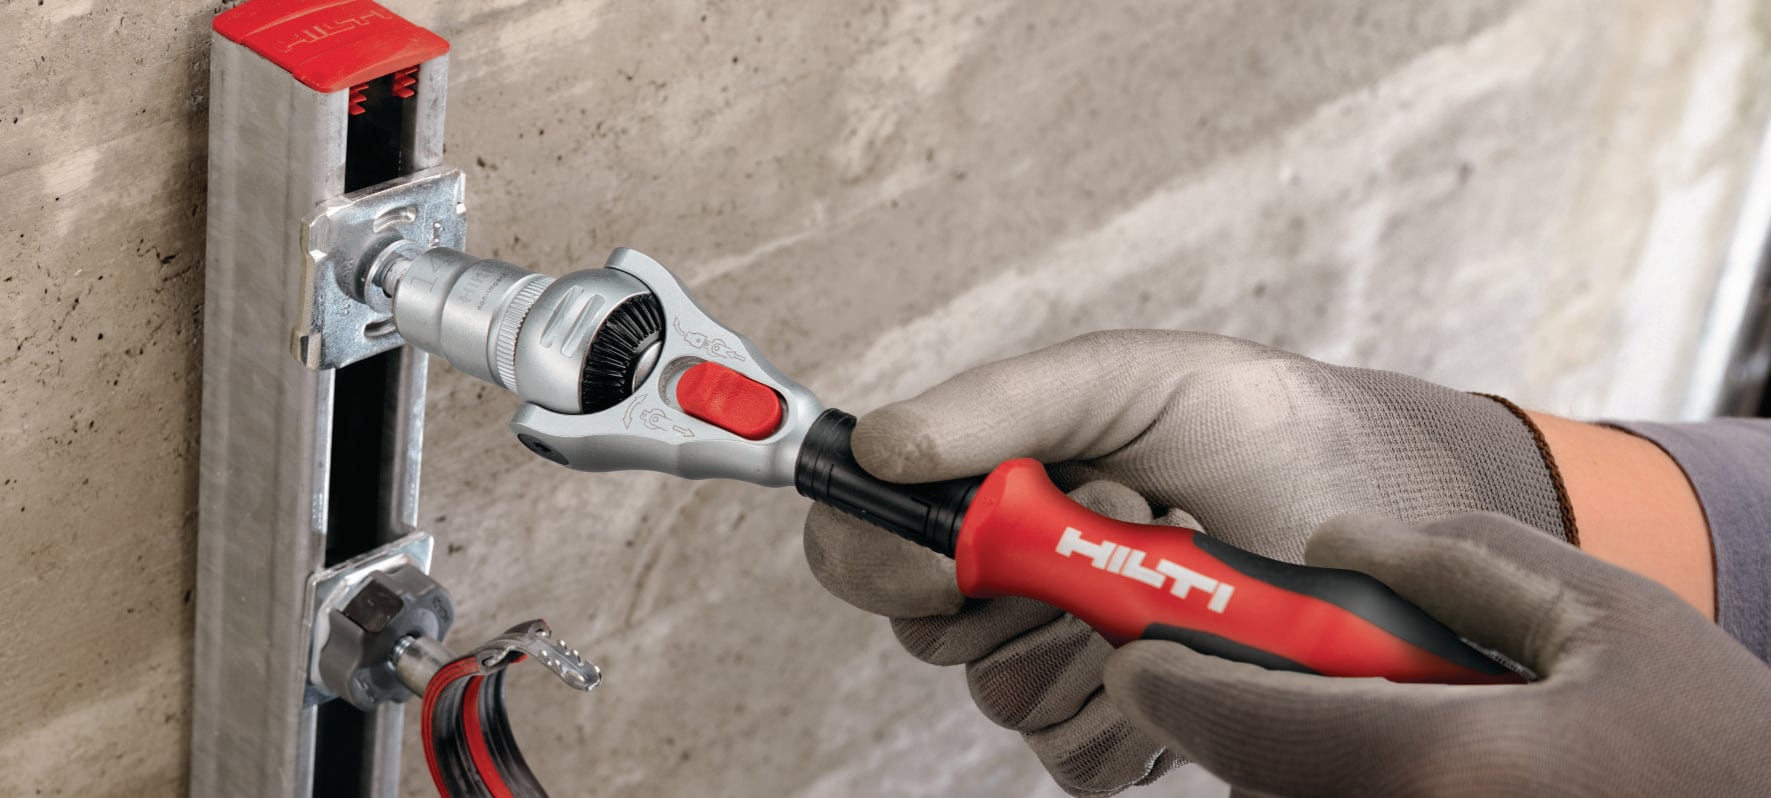 S-SWS Socket wrench set - Bits and sockets - Hilti Israel